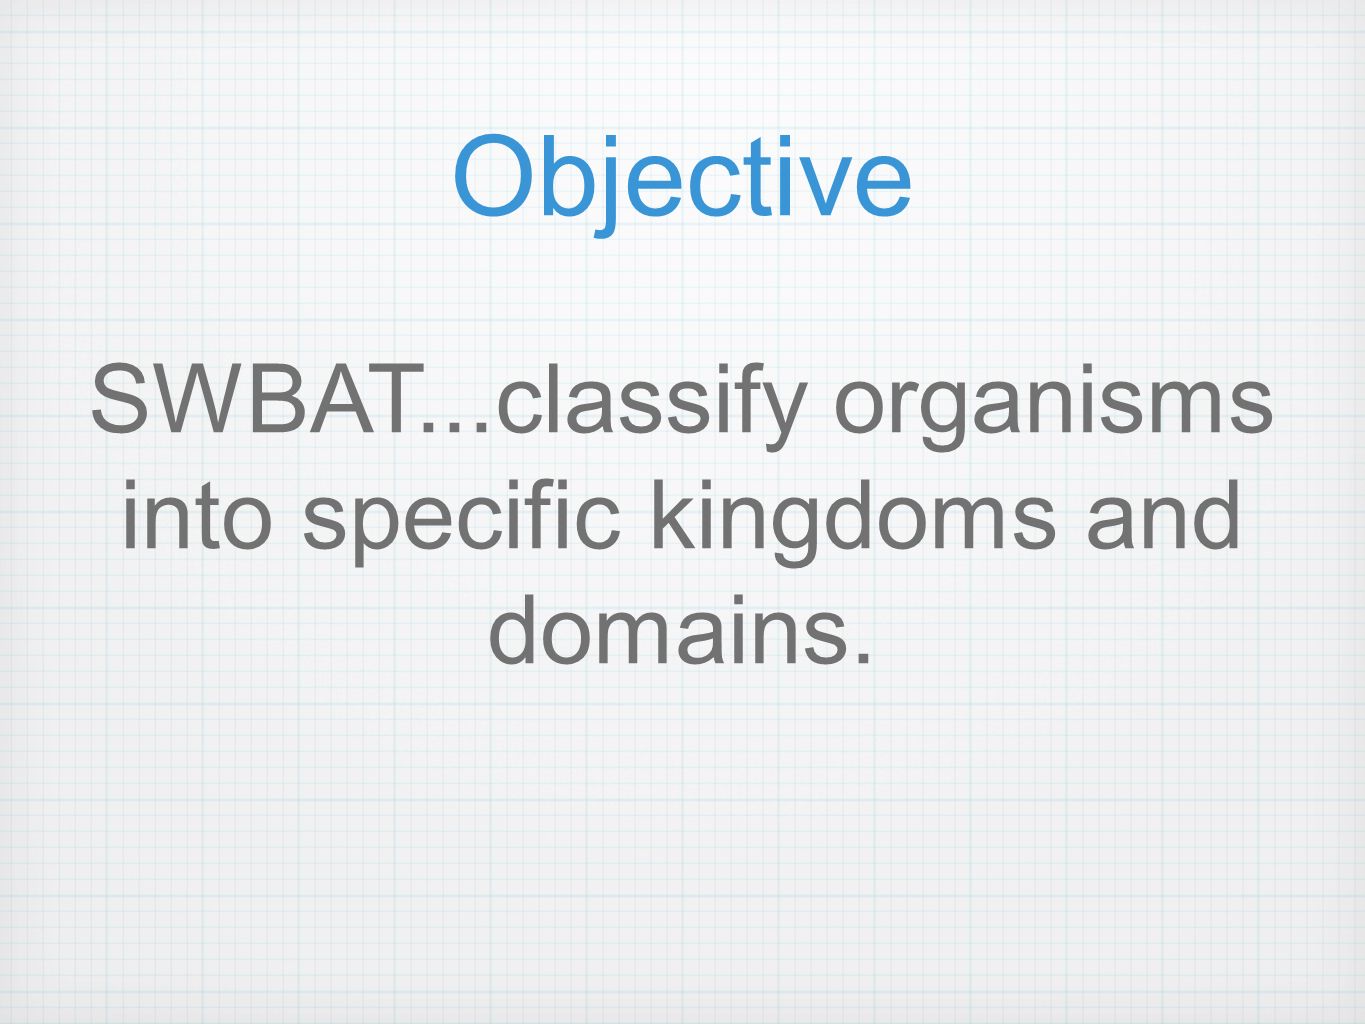 Objective SWBAT...classify organisms into specific kingdoms and domains.